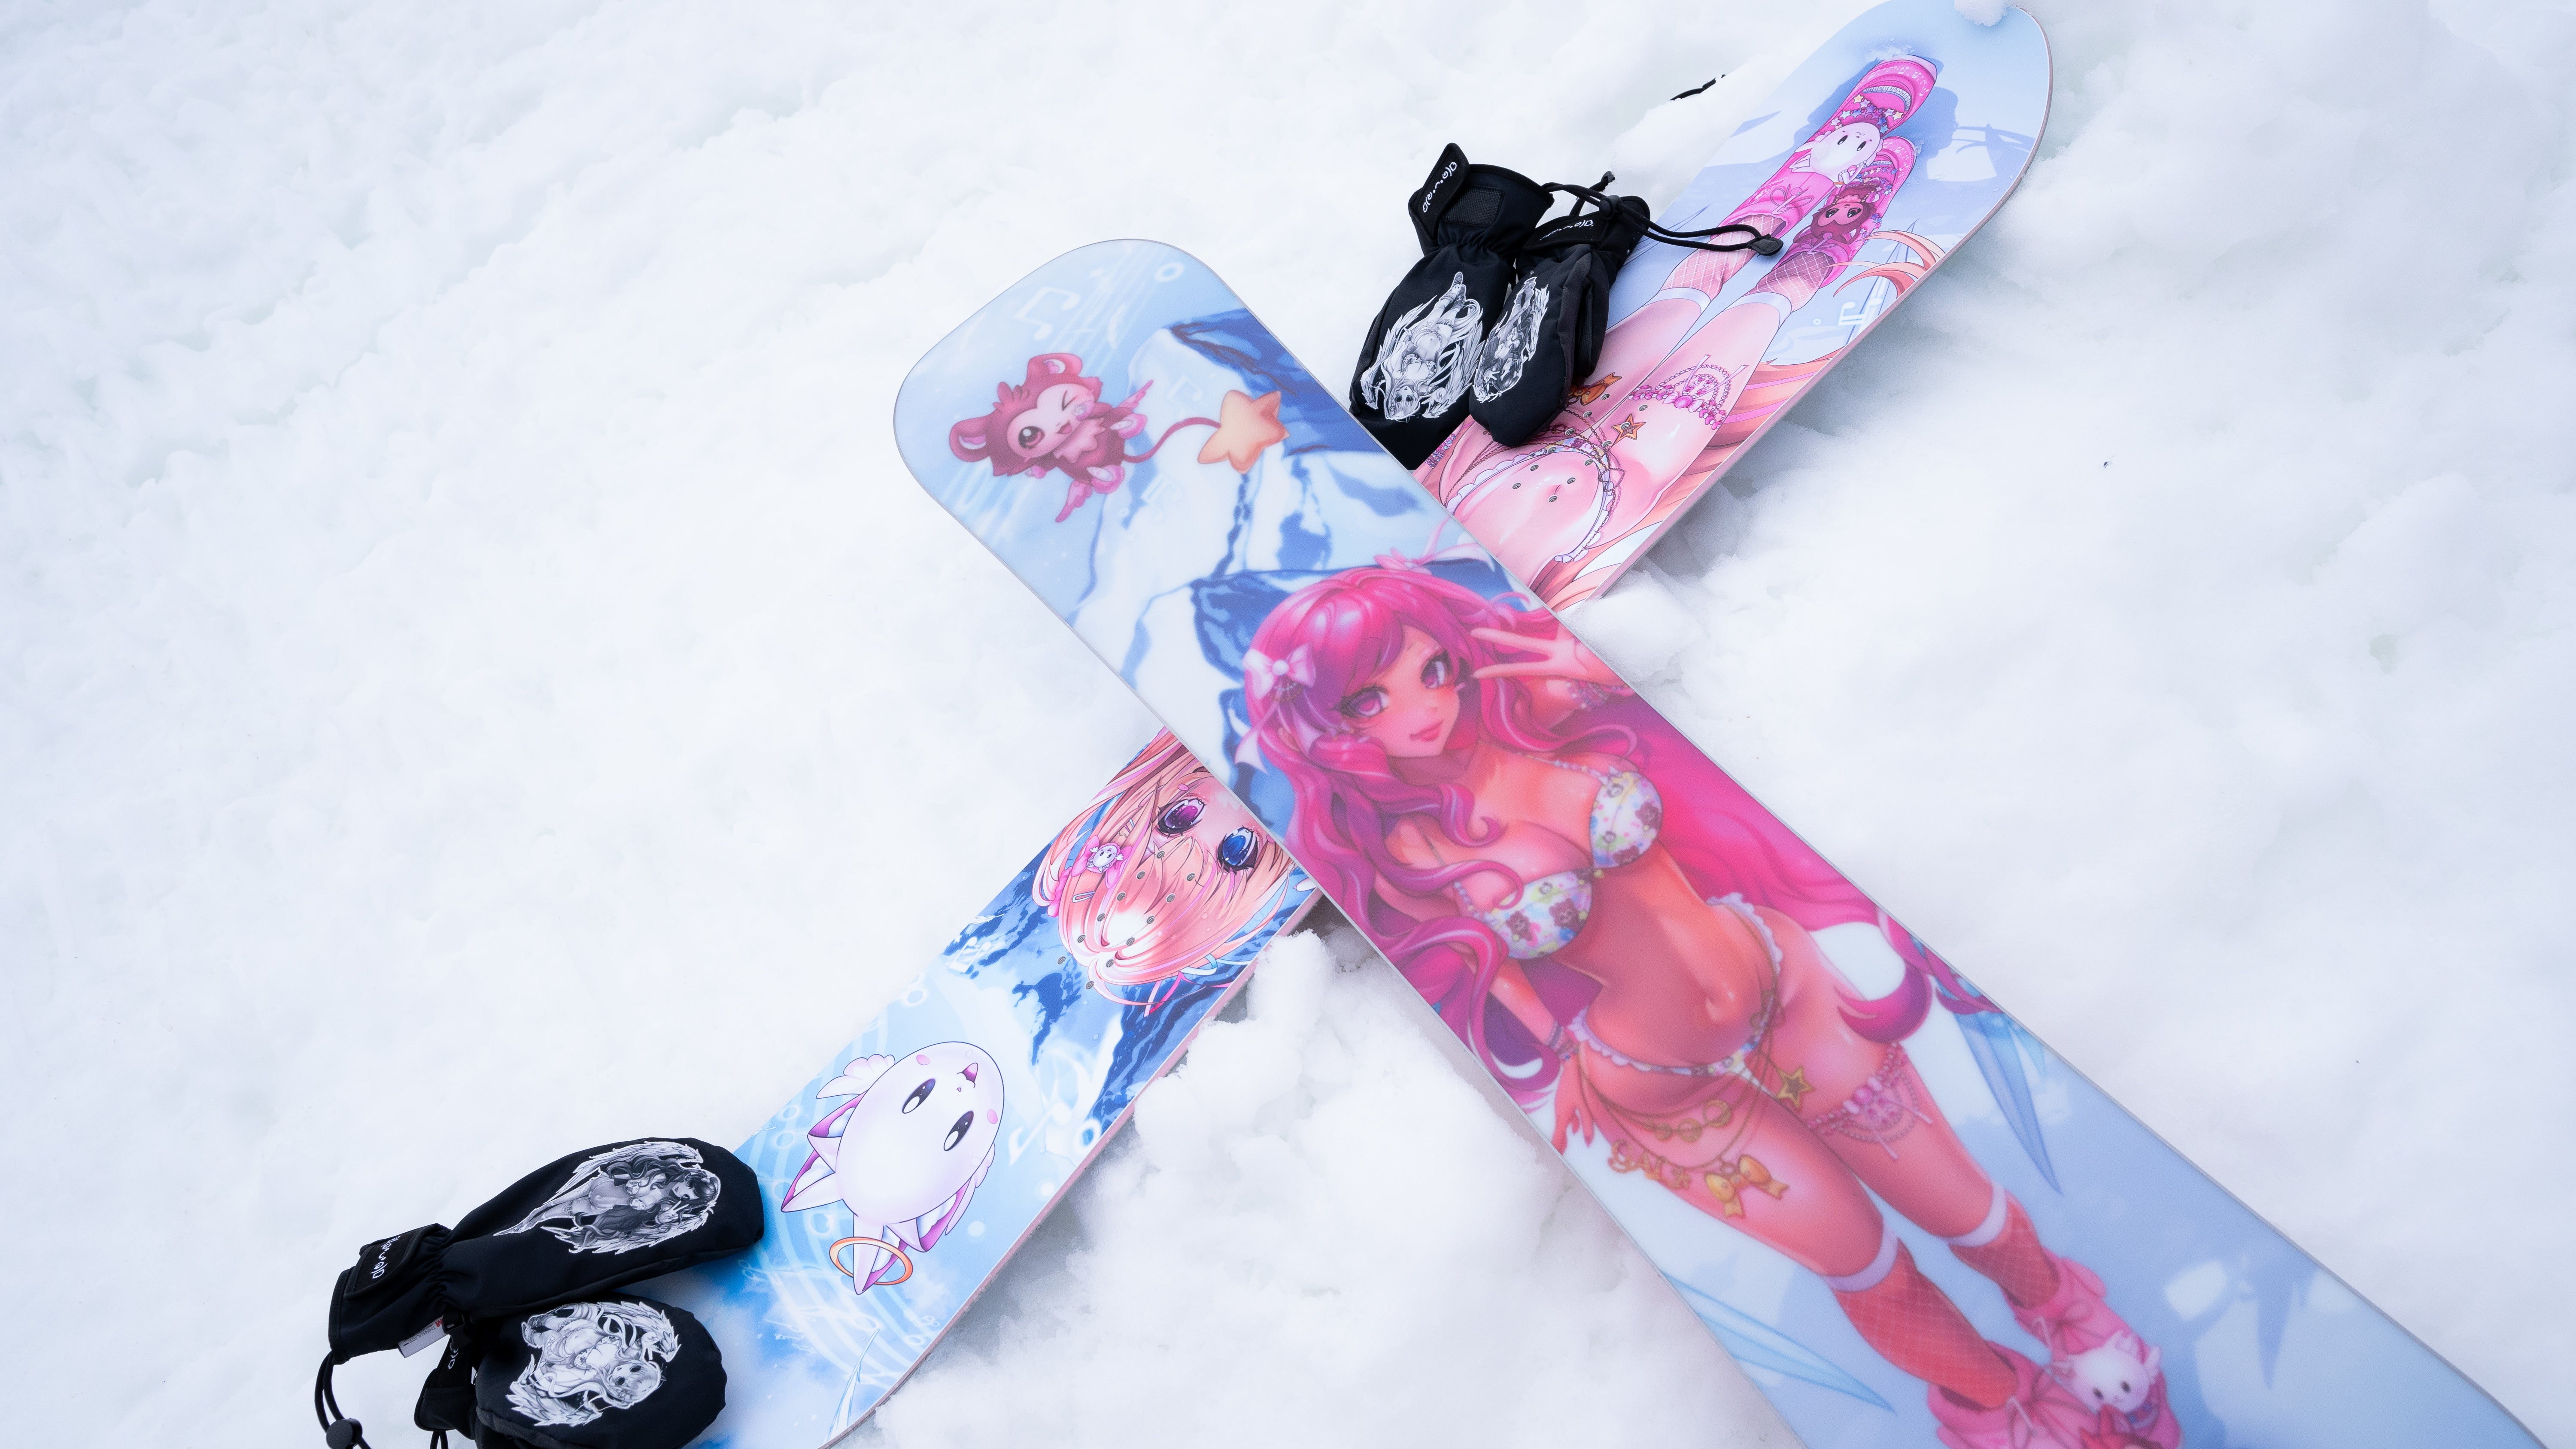 Premium Photo | A cartoon girl is riding a snowboard in a painting.